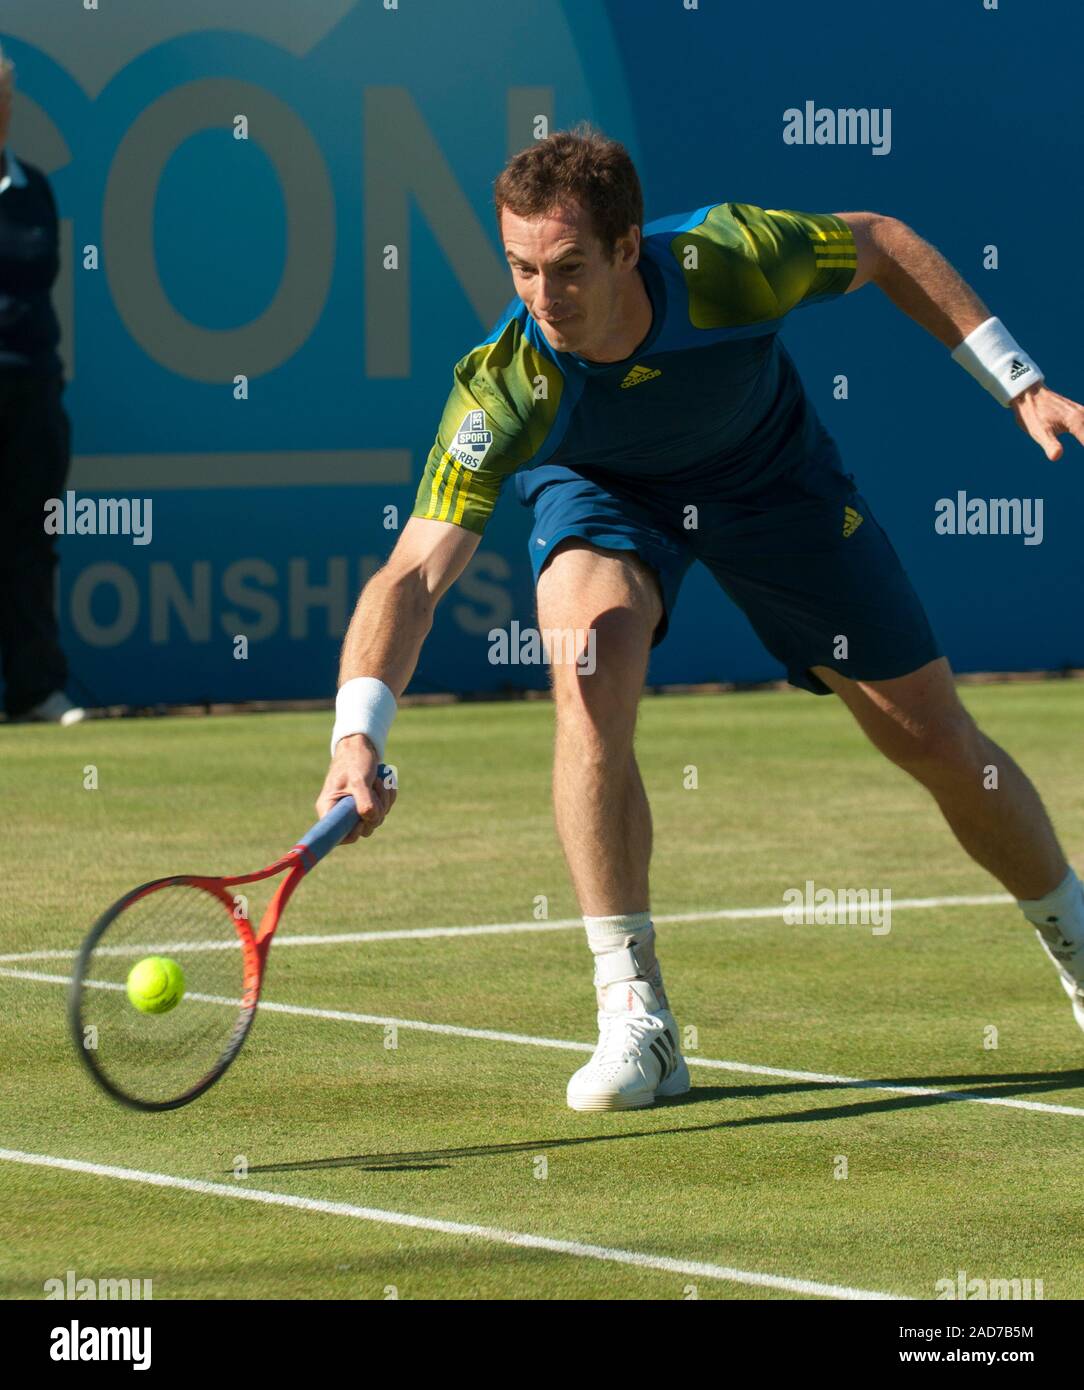 British tennis player Andrew Murray on court at Queens tennis club in the Aegon men's singles championship. Stock Photo